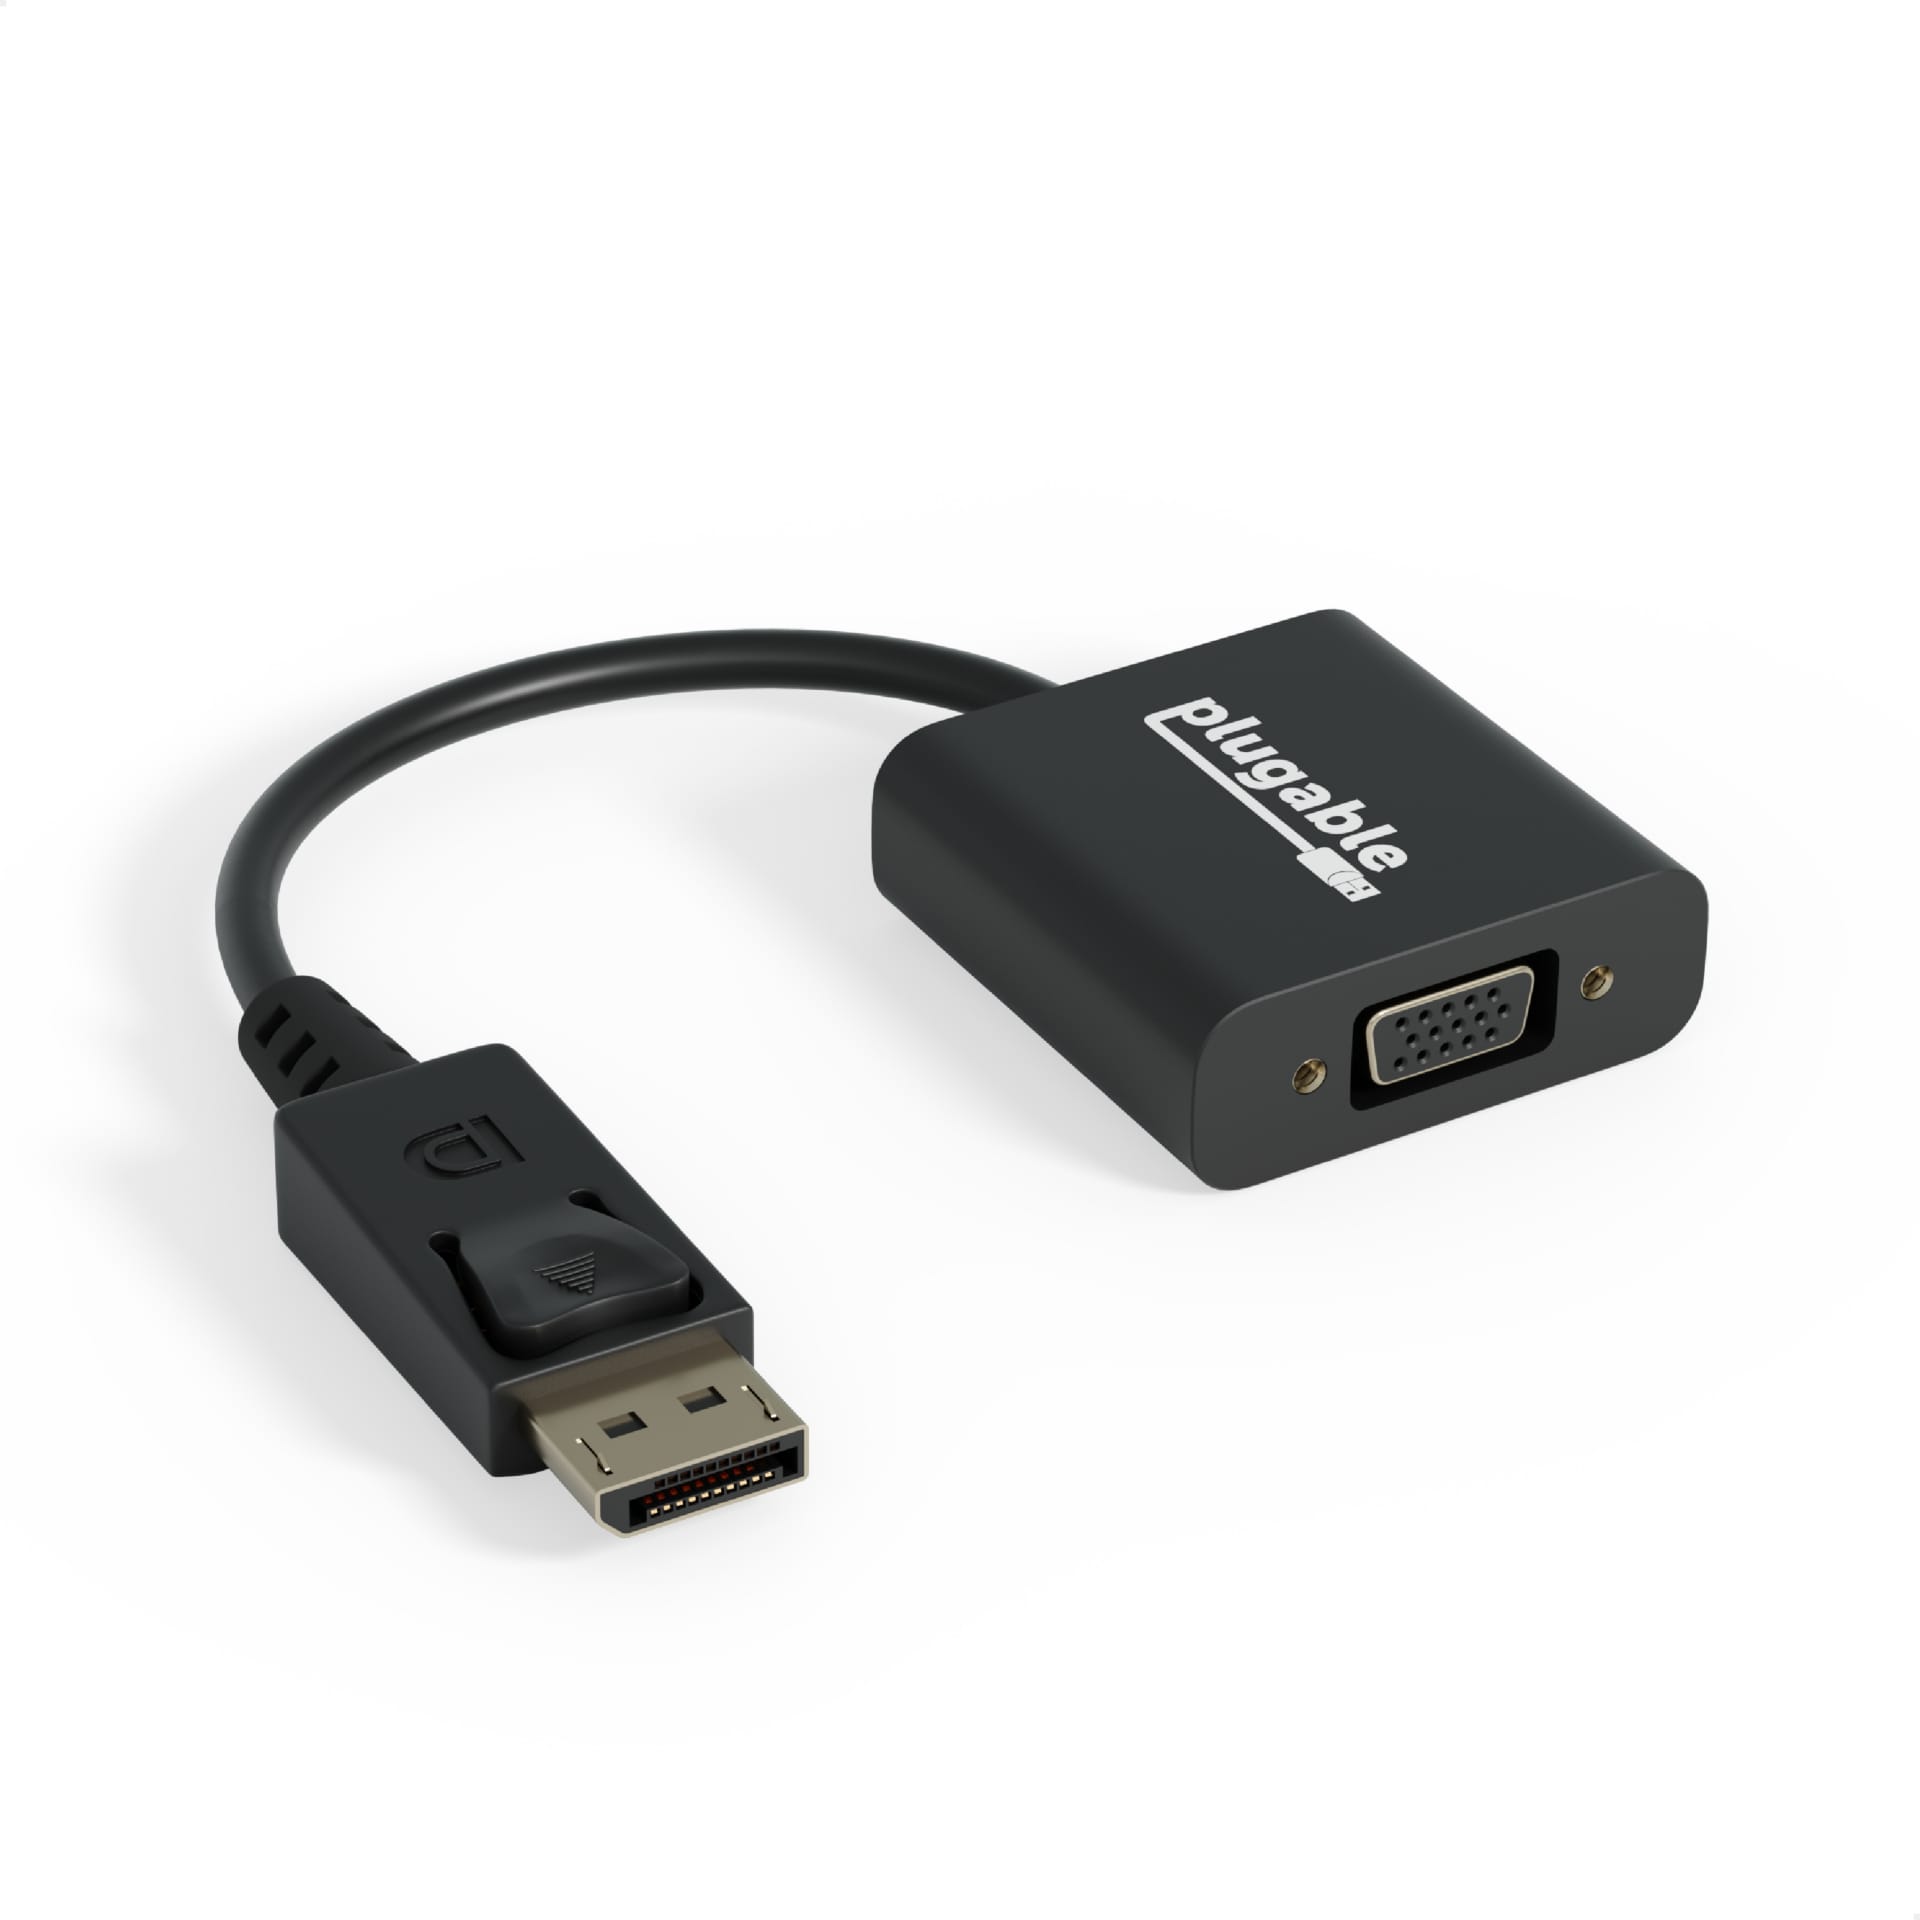 Plugable DisplayPort to VGA Adapter, Active DP to VGA Converter, Supports up to 1920x1080, Driverless